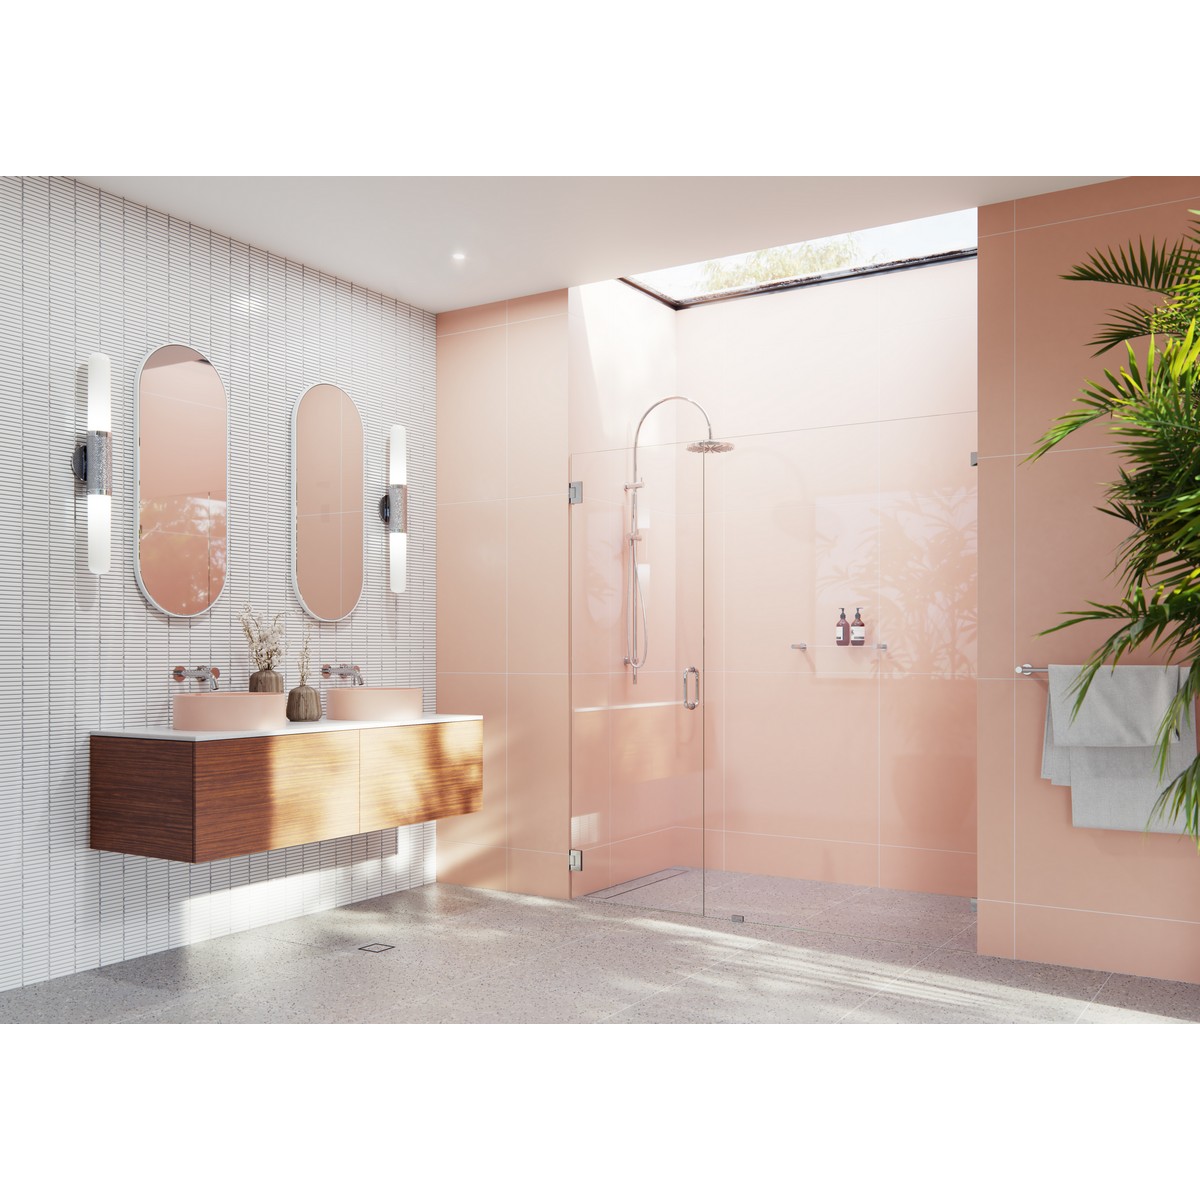 GLASS WAREHOUSE GW-WH-70 ILLUME 70 W X 78 H WALL HINGED FULLY FRAMELESS GLASS SHOWER ENCLOSURE